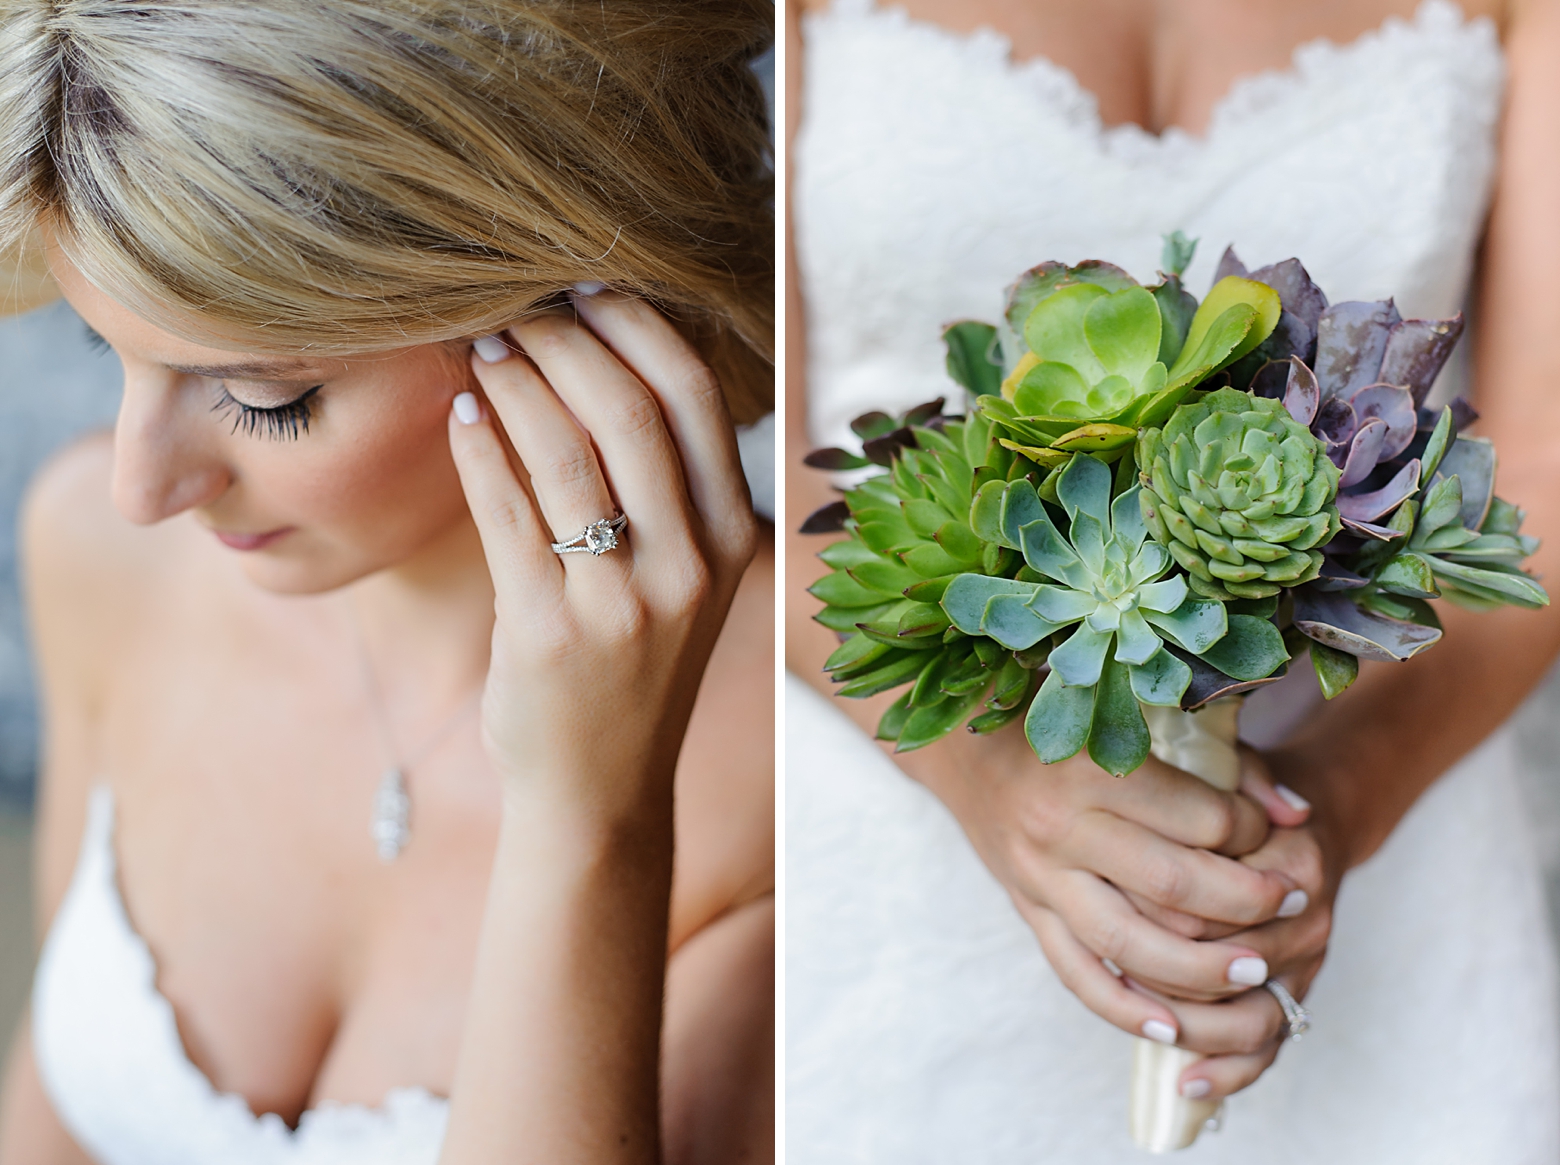 Detailed photos of the Brides ring on her hand and her holding the succulent filled flower bouquet